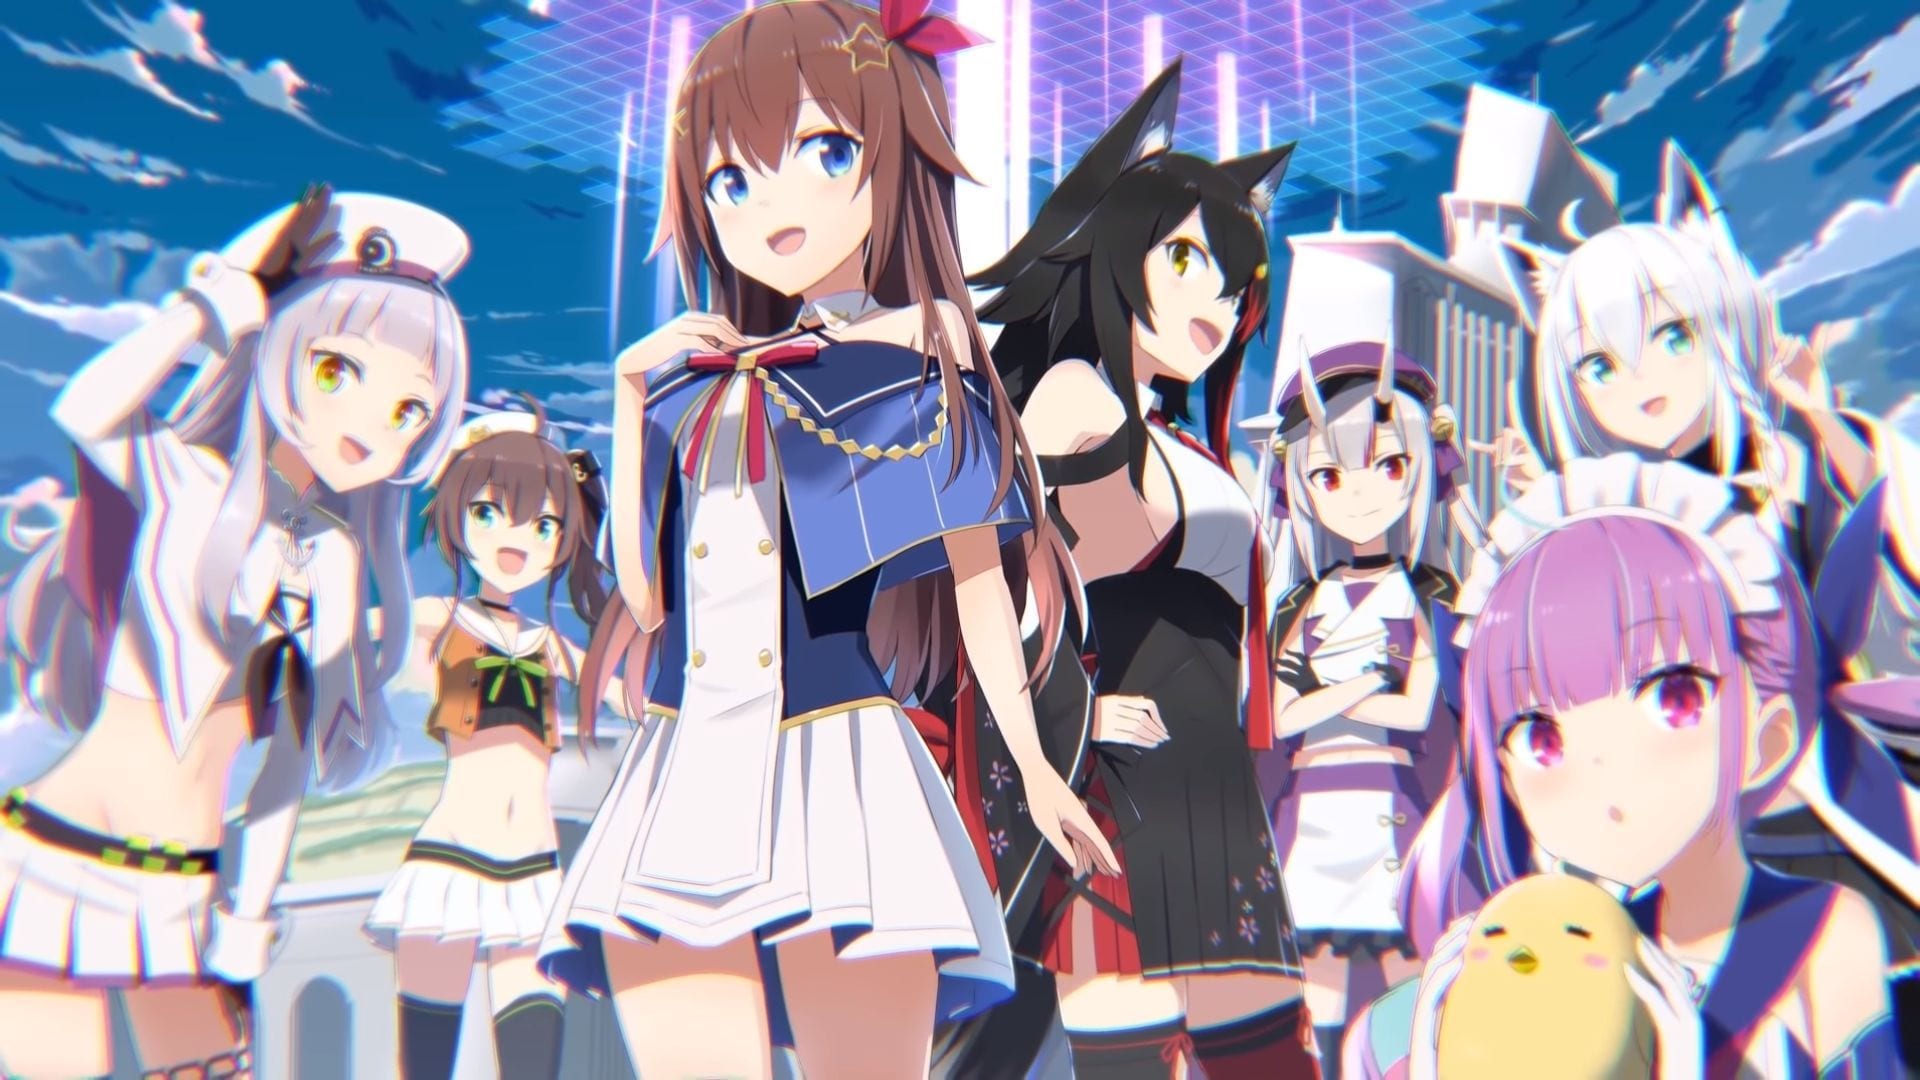 Azur Lane Kicks-Off Virtual YouTuber Event With New Trailer